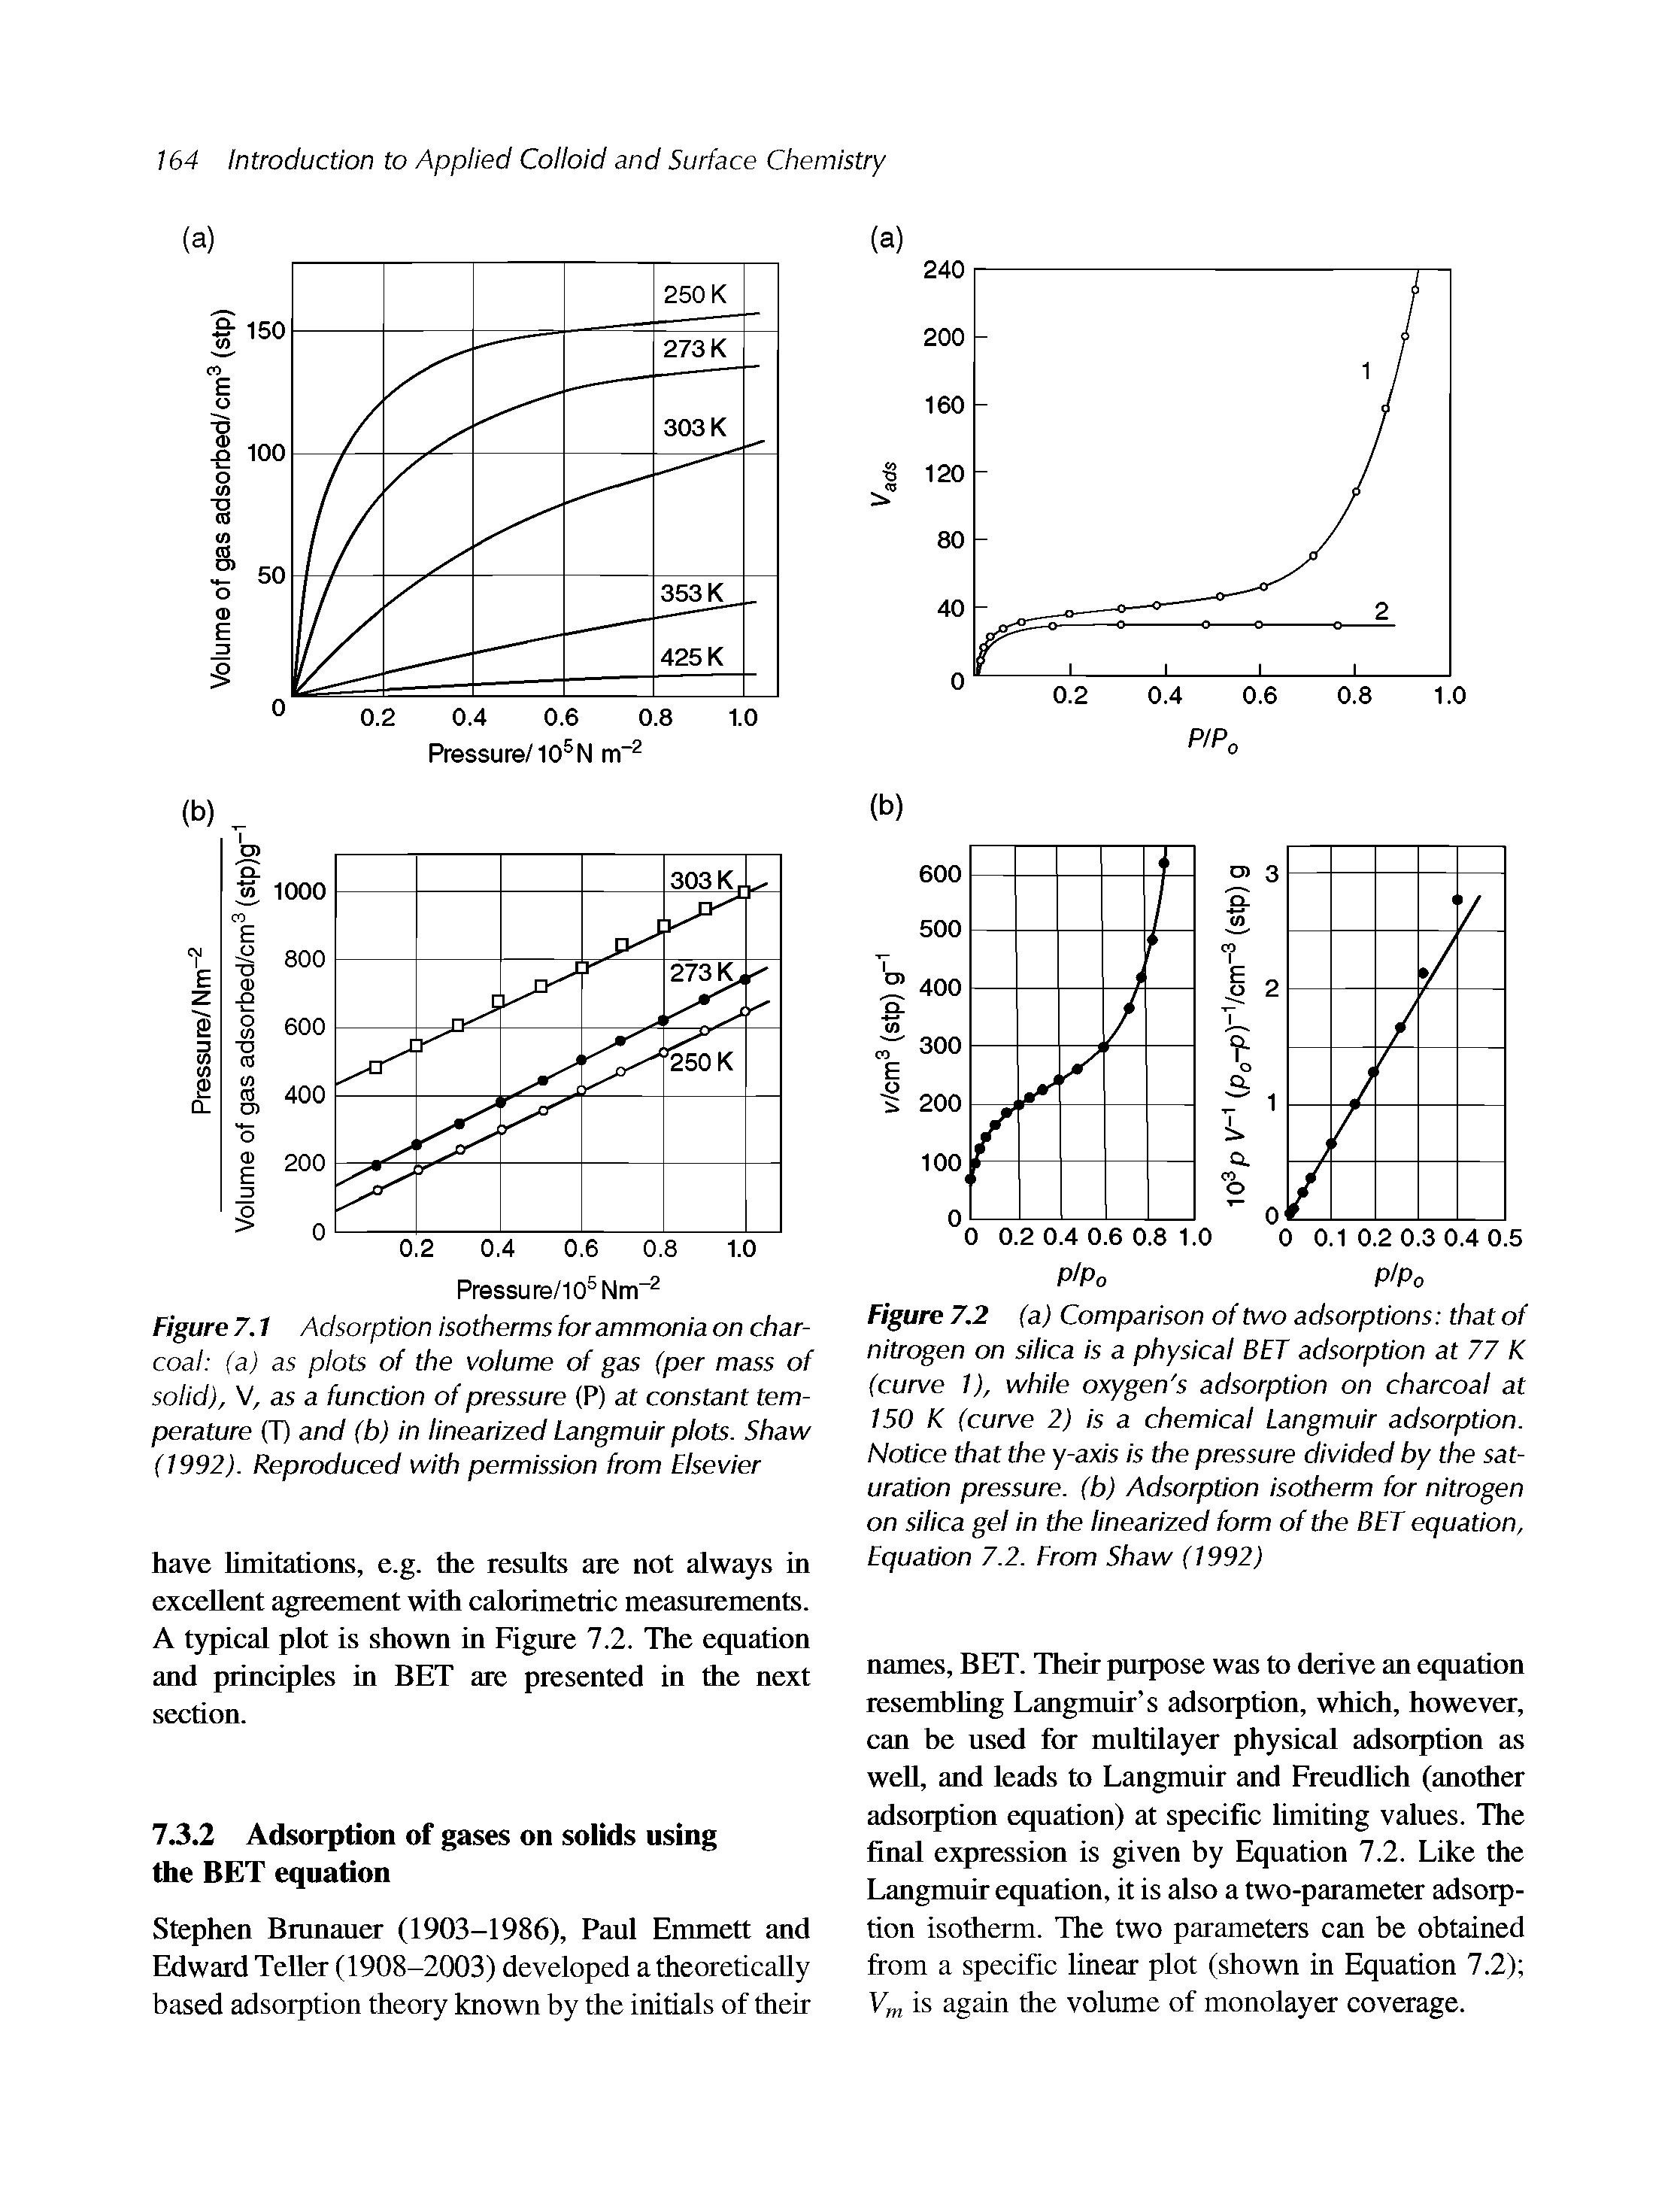 Figure 7.1 Adsorption isotherms for ammonia on charcoal (a) as plots of the volume of gas (per mass of solid), V, as a function of pressure (P) at constant temperature (T) and (b) in linearized Langmuir plots. Shaw (1992). Reproduced with permission from Elsevier...